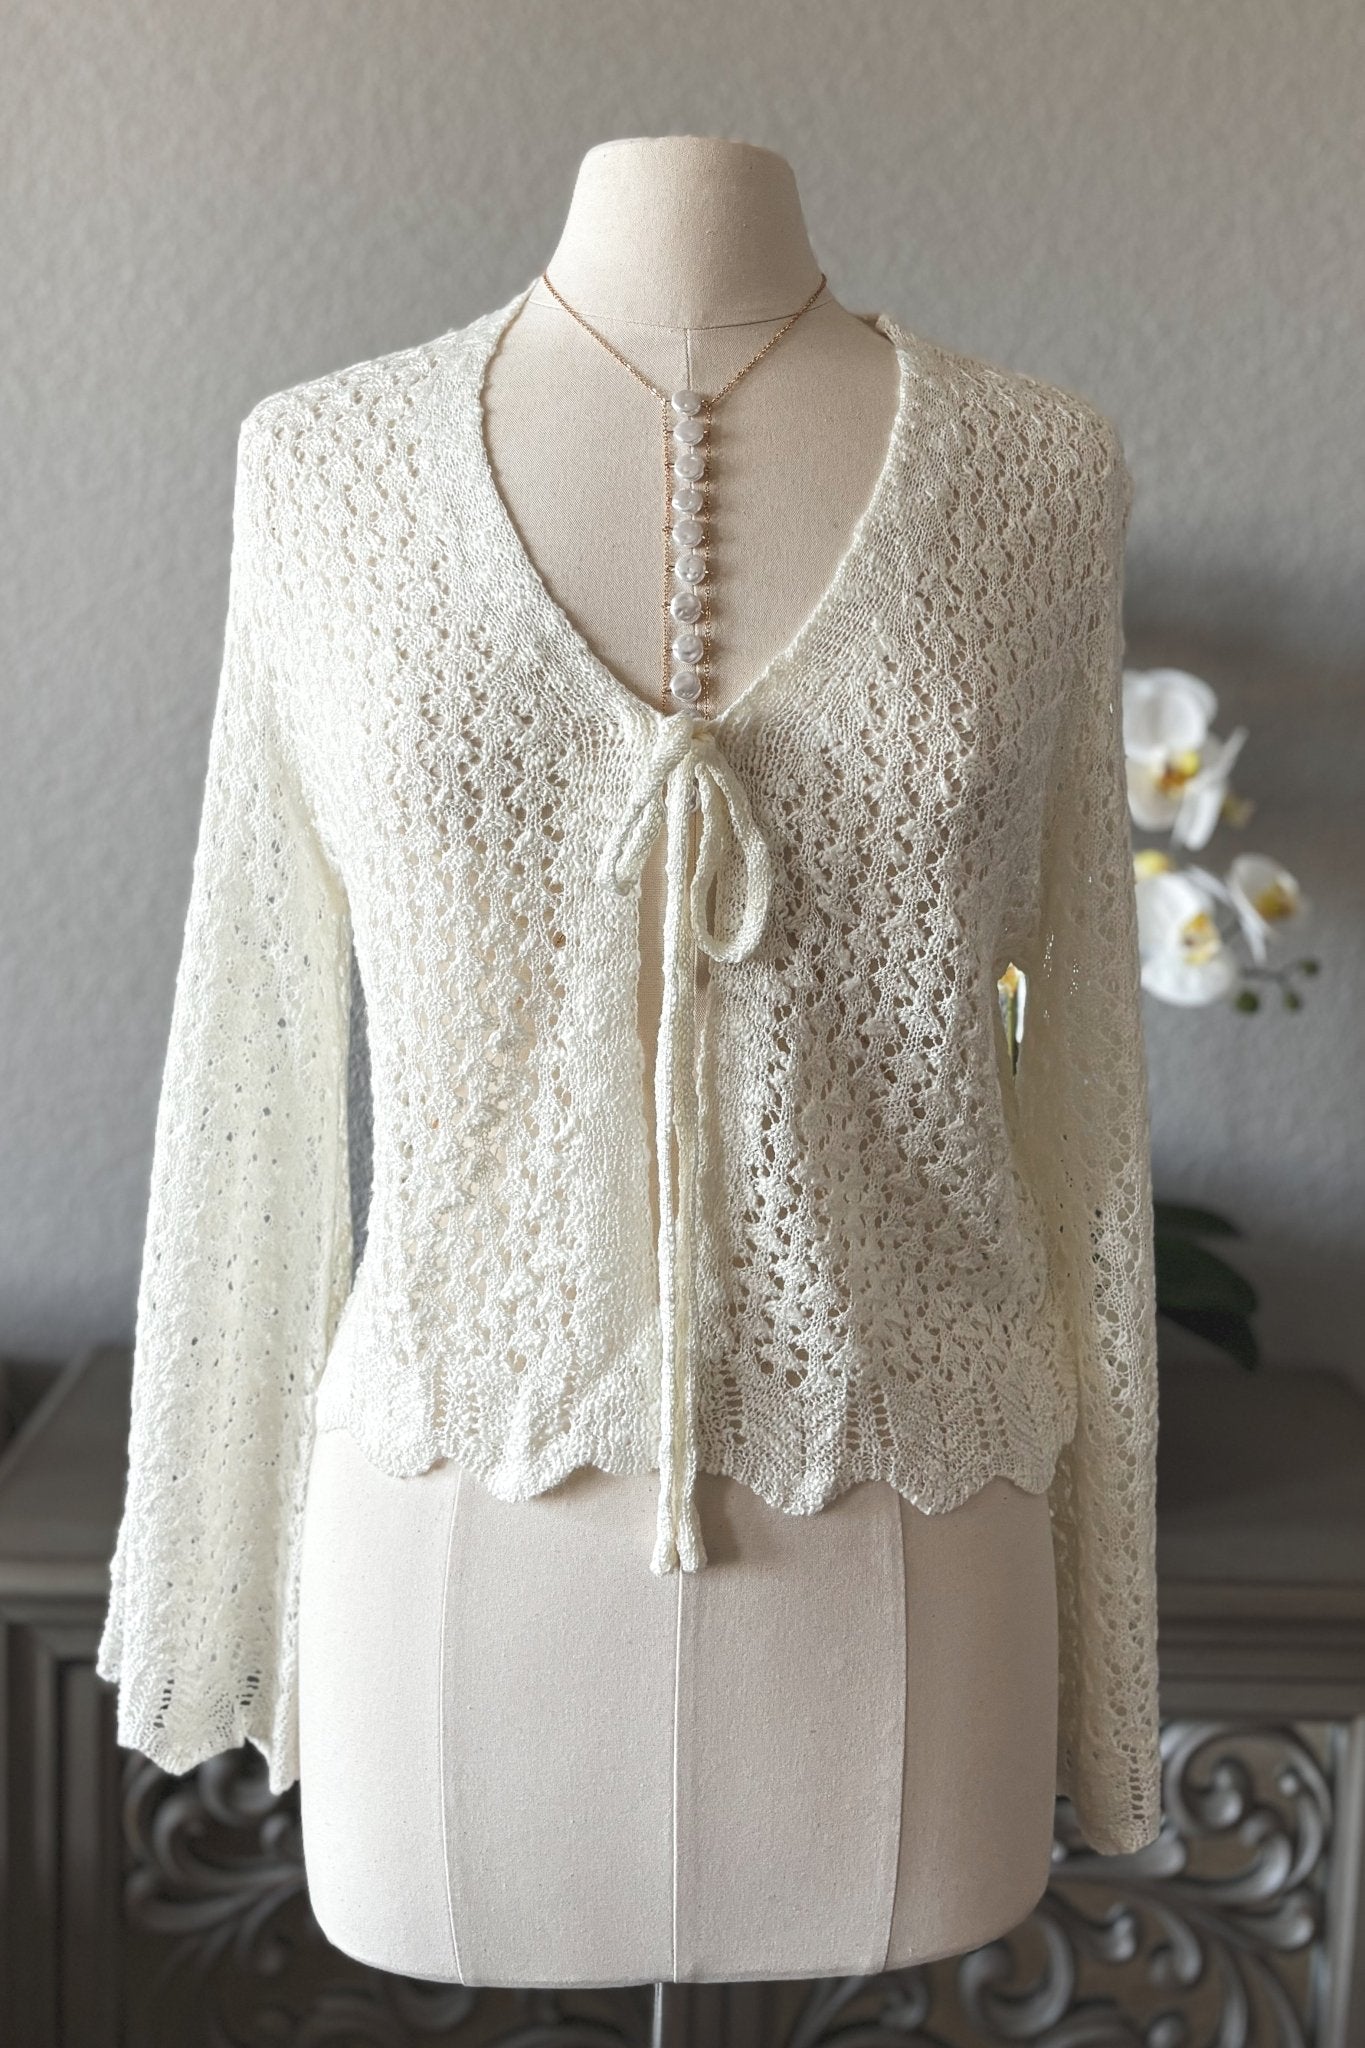 Women's Crochet Knit Tie Front Bell Sleeve Cardigan | Cream - Women's Shirts & Tops - Blooming Daily